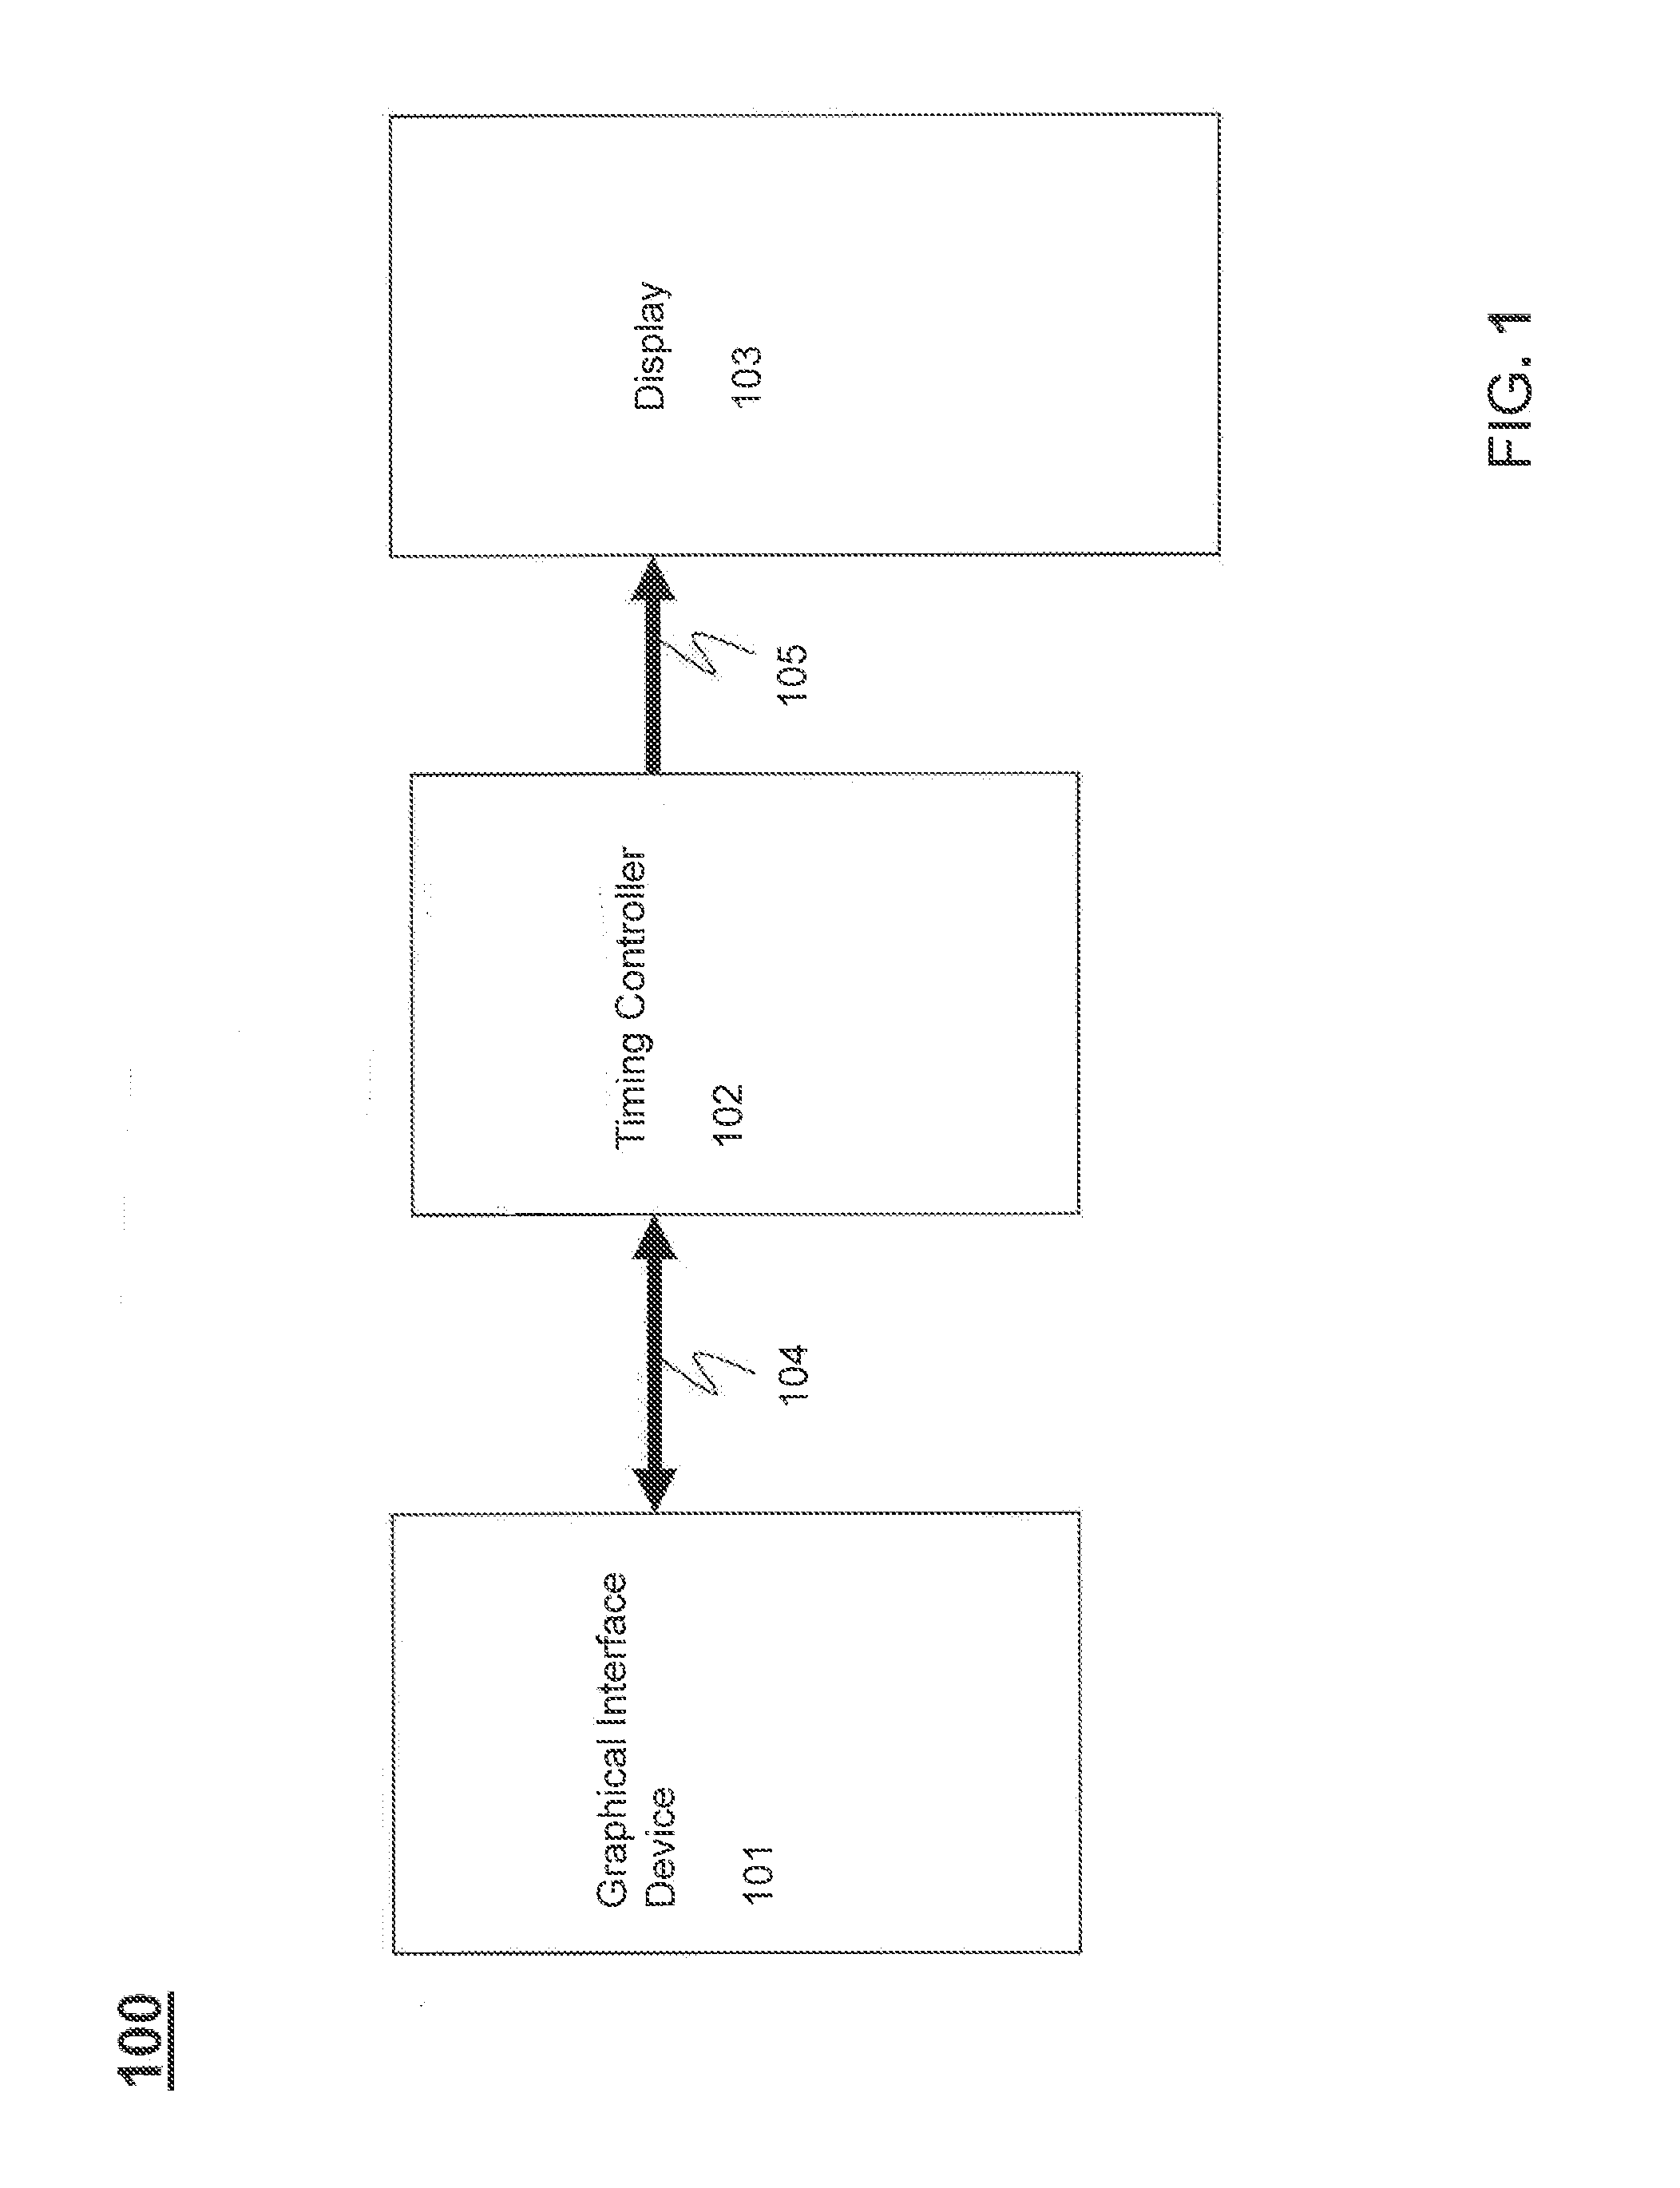 Method and System for Display Output Stutter